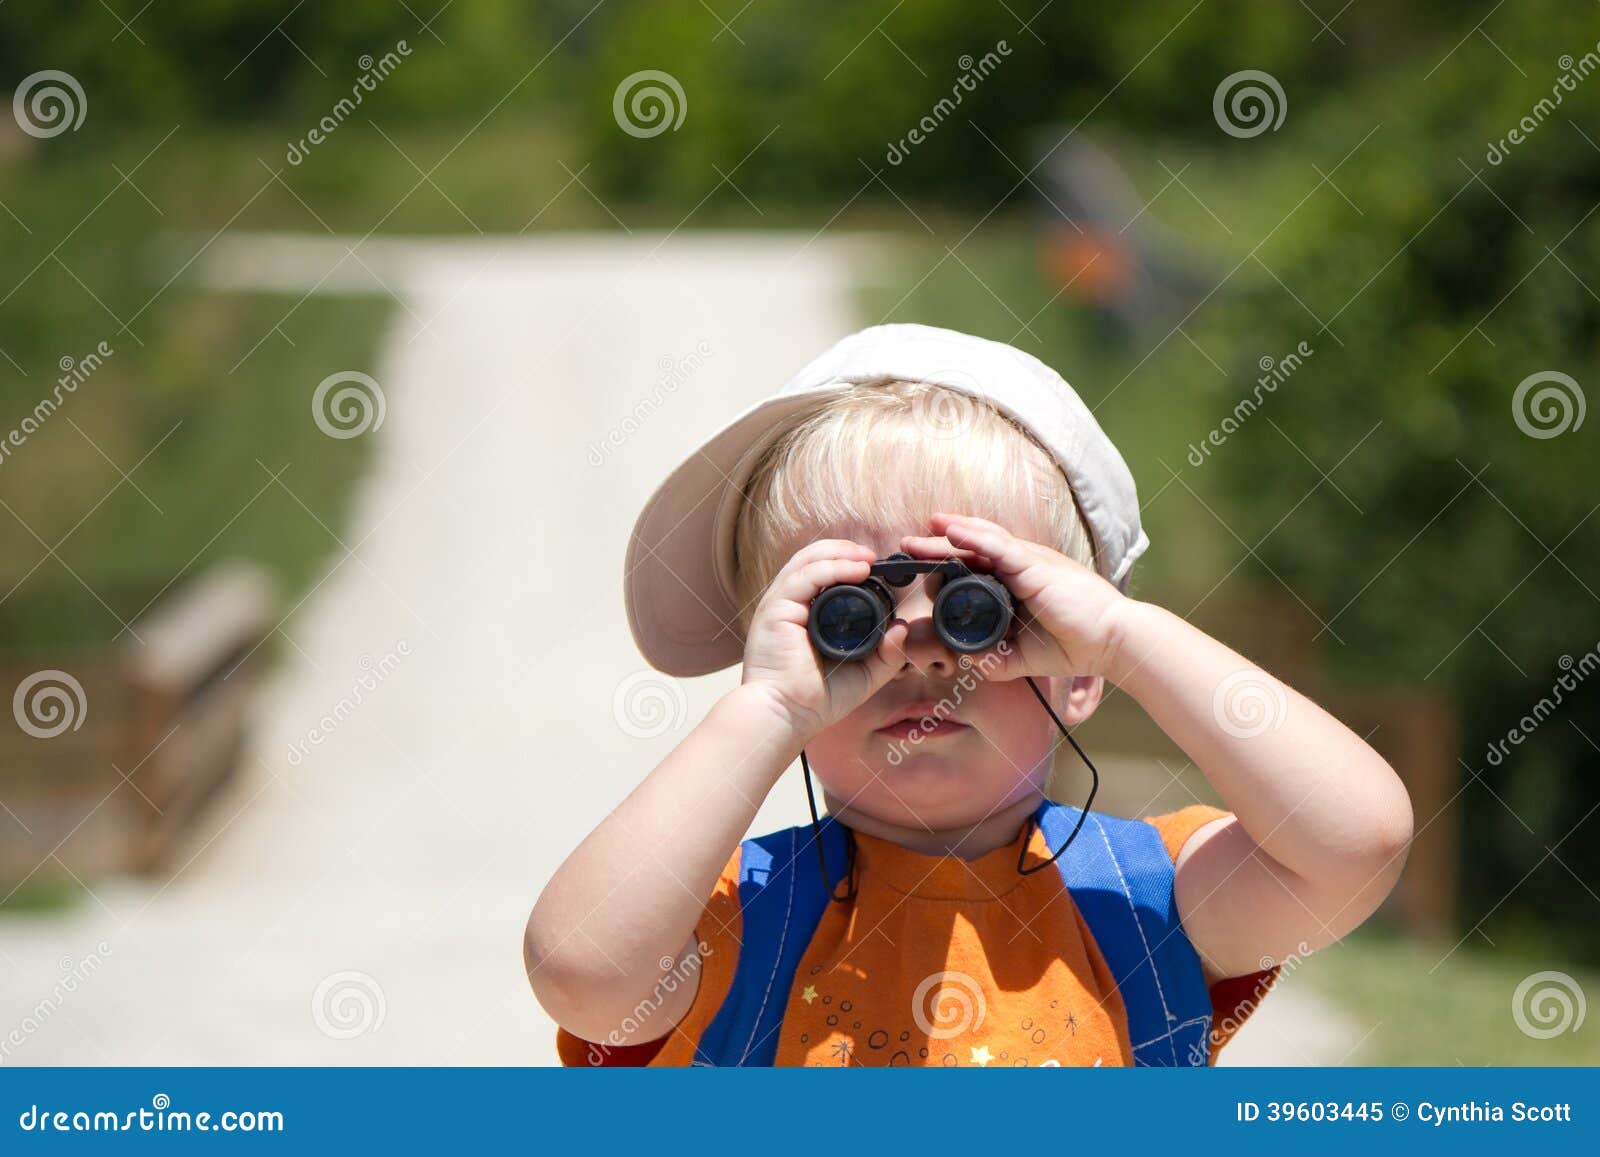 little boy searching, searches with binoculars